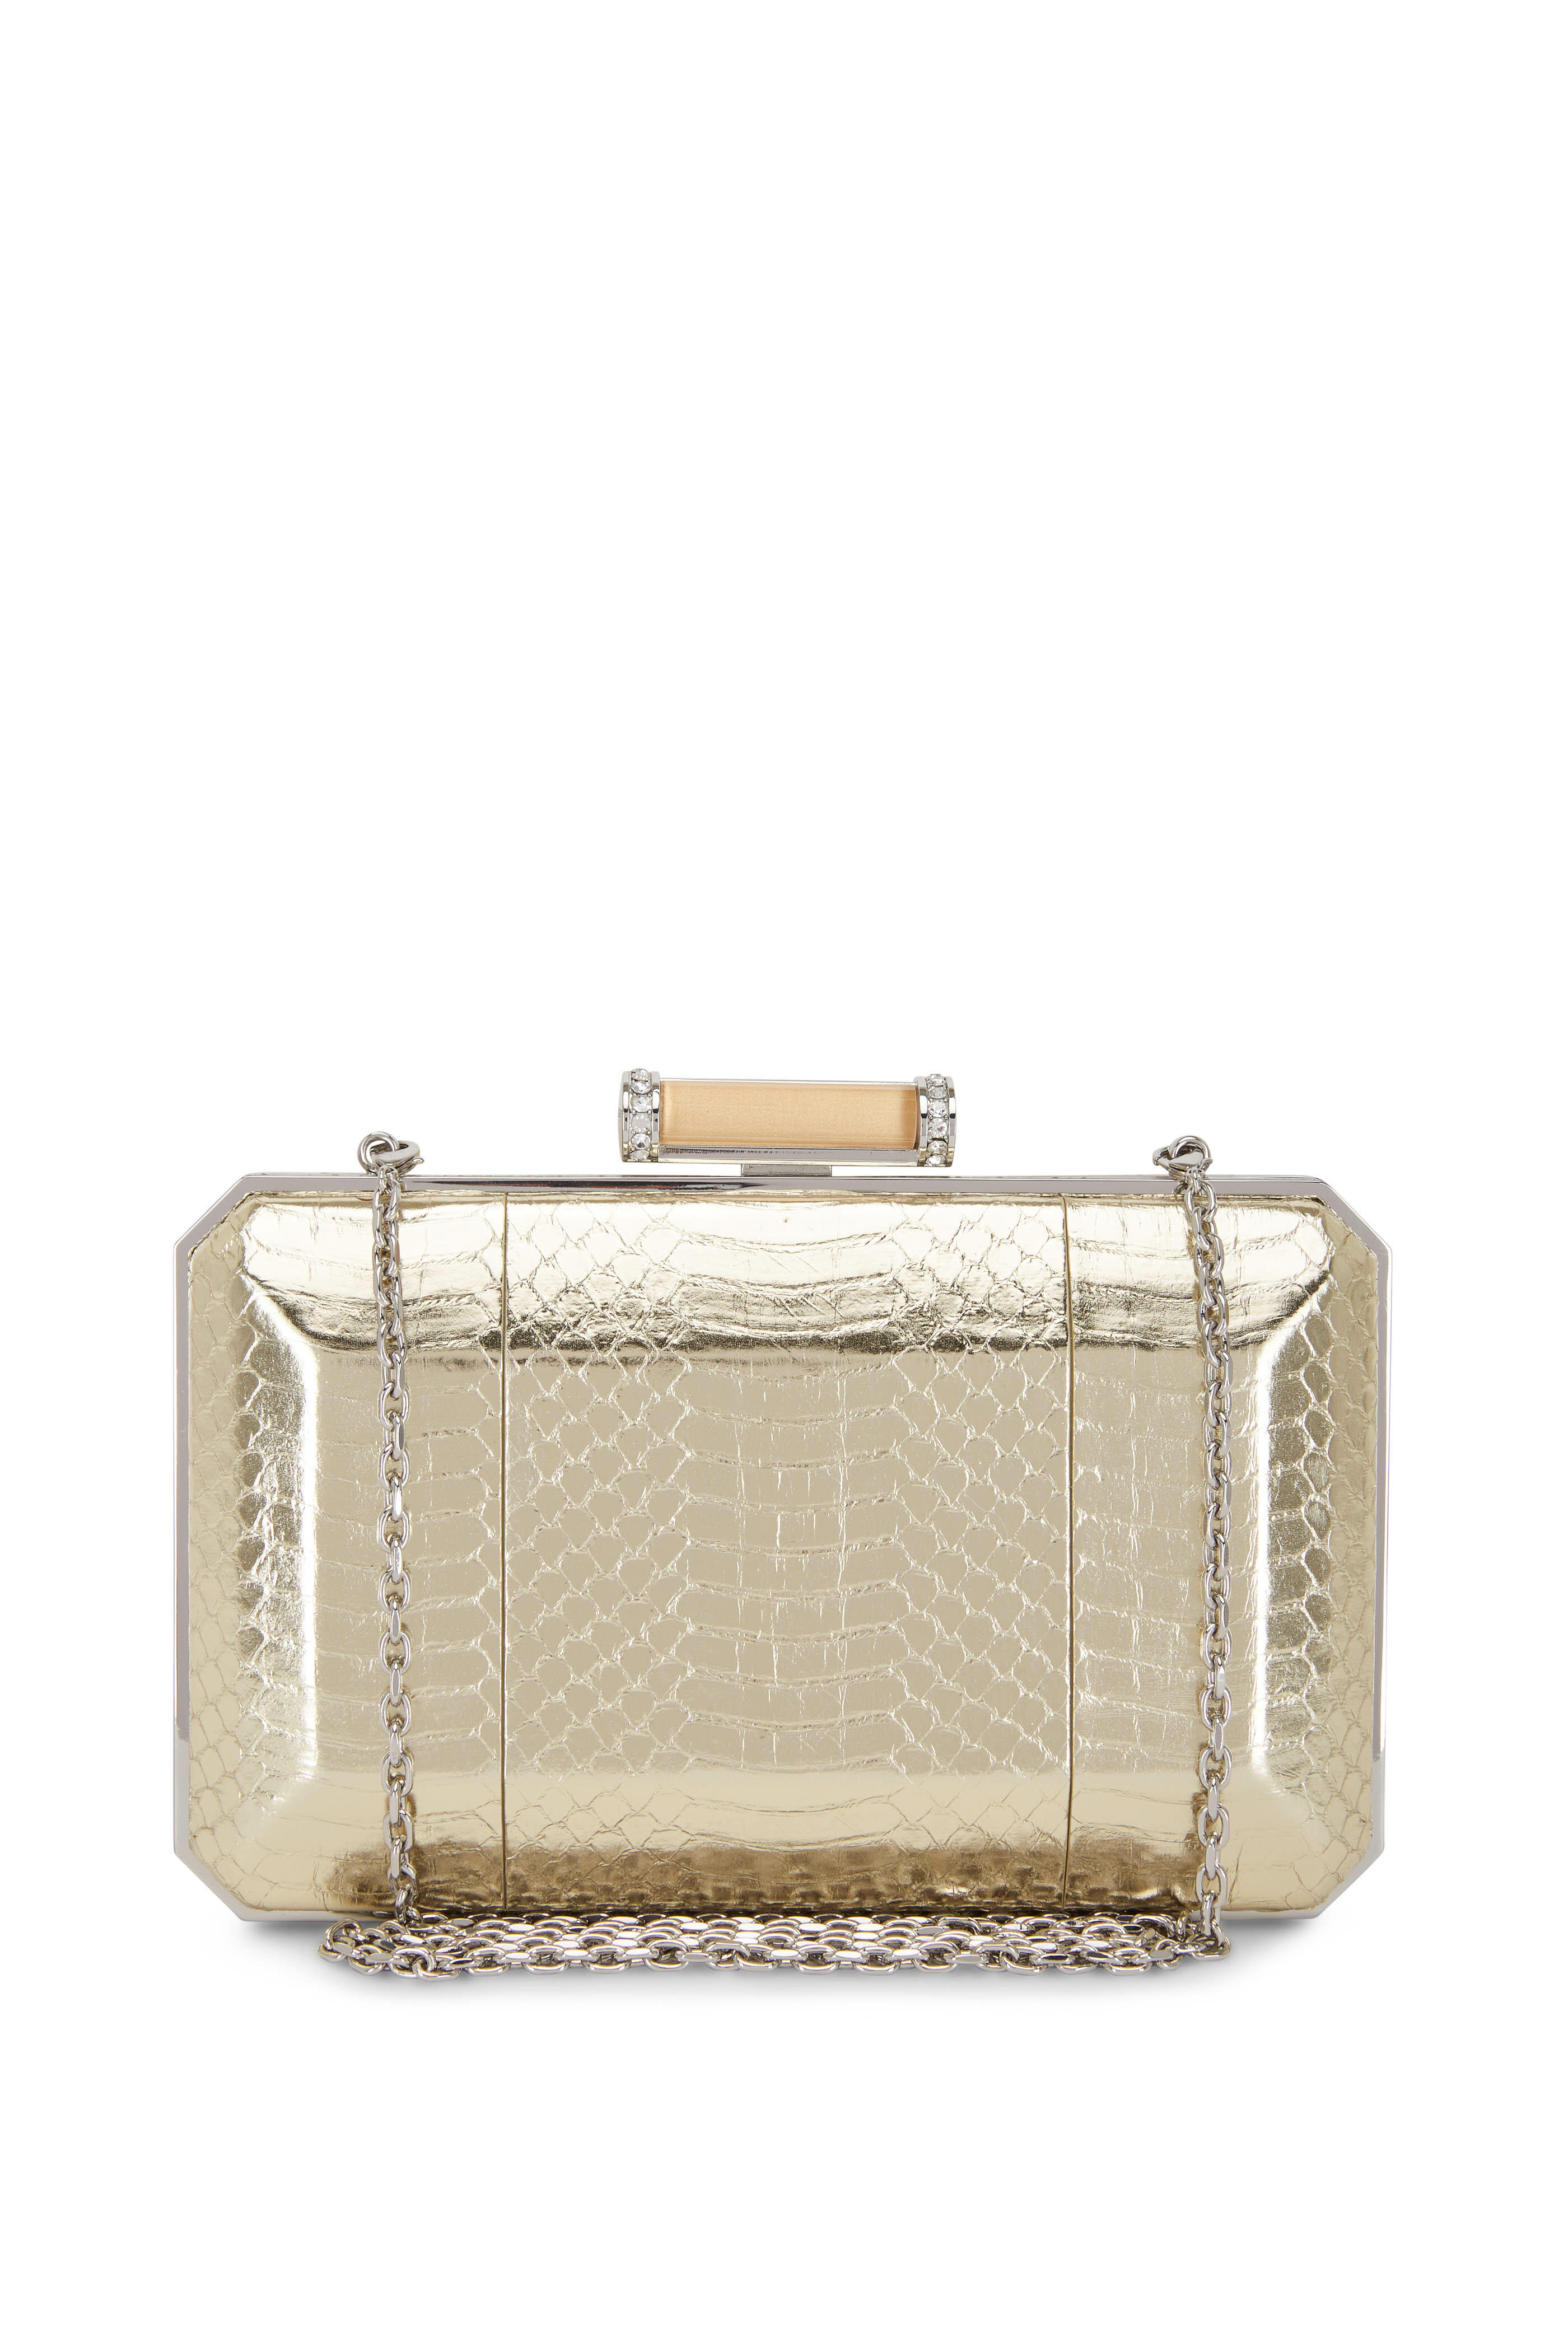 Judith Leiber Couture Women's Jet Full Bead Envelope Clutch | by Mitchell Stores